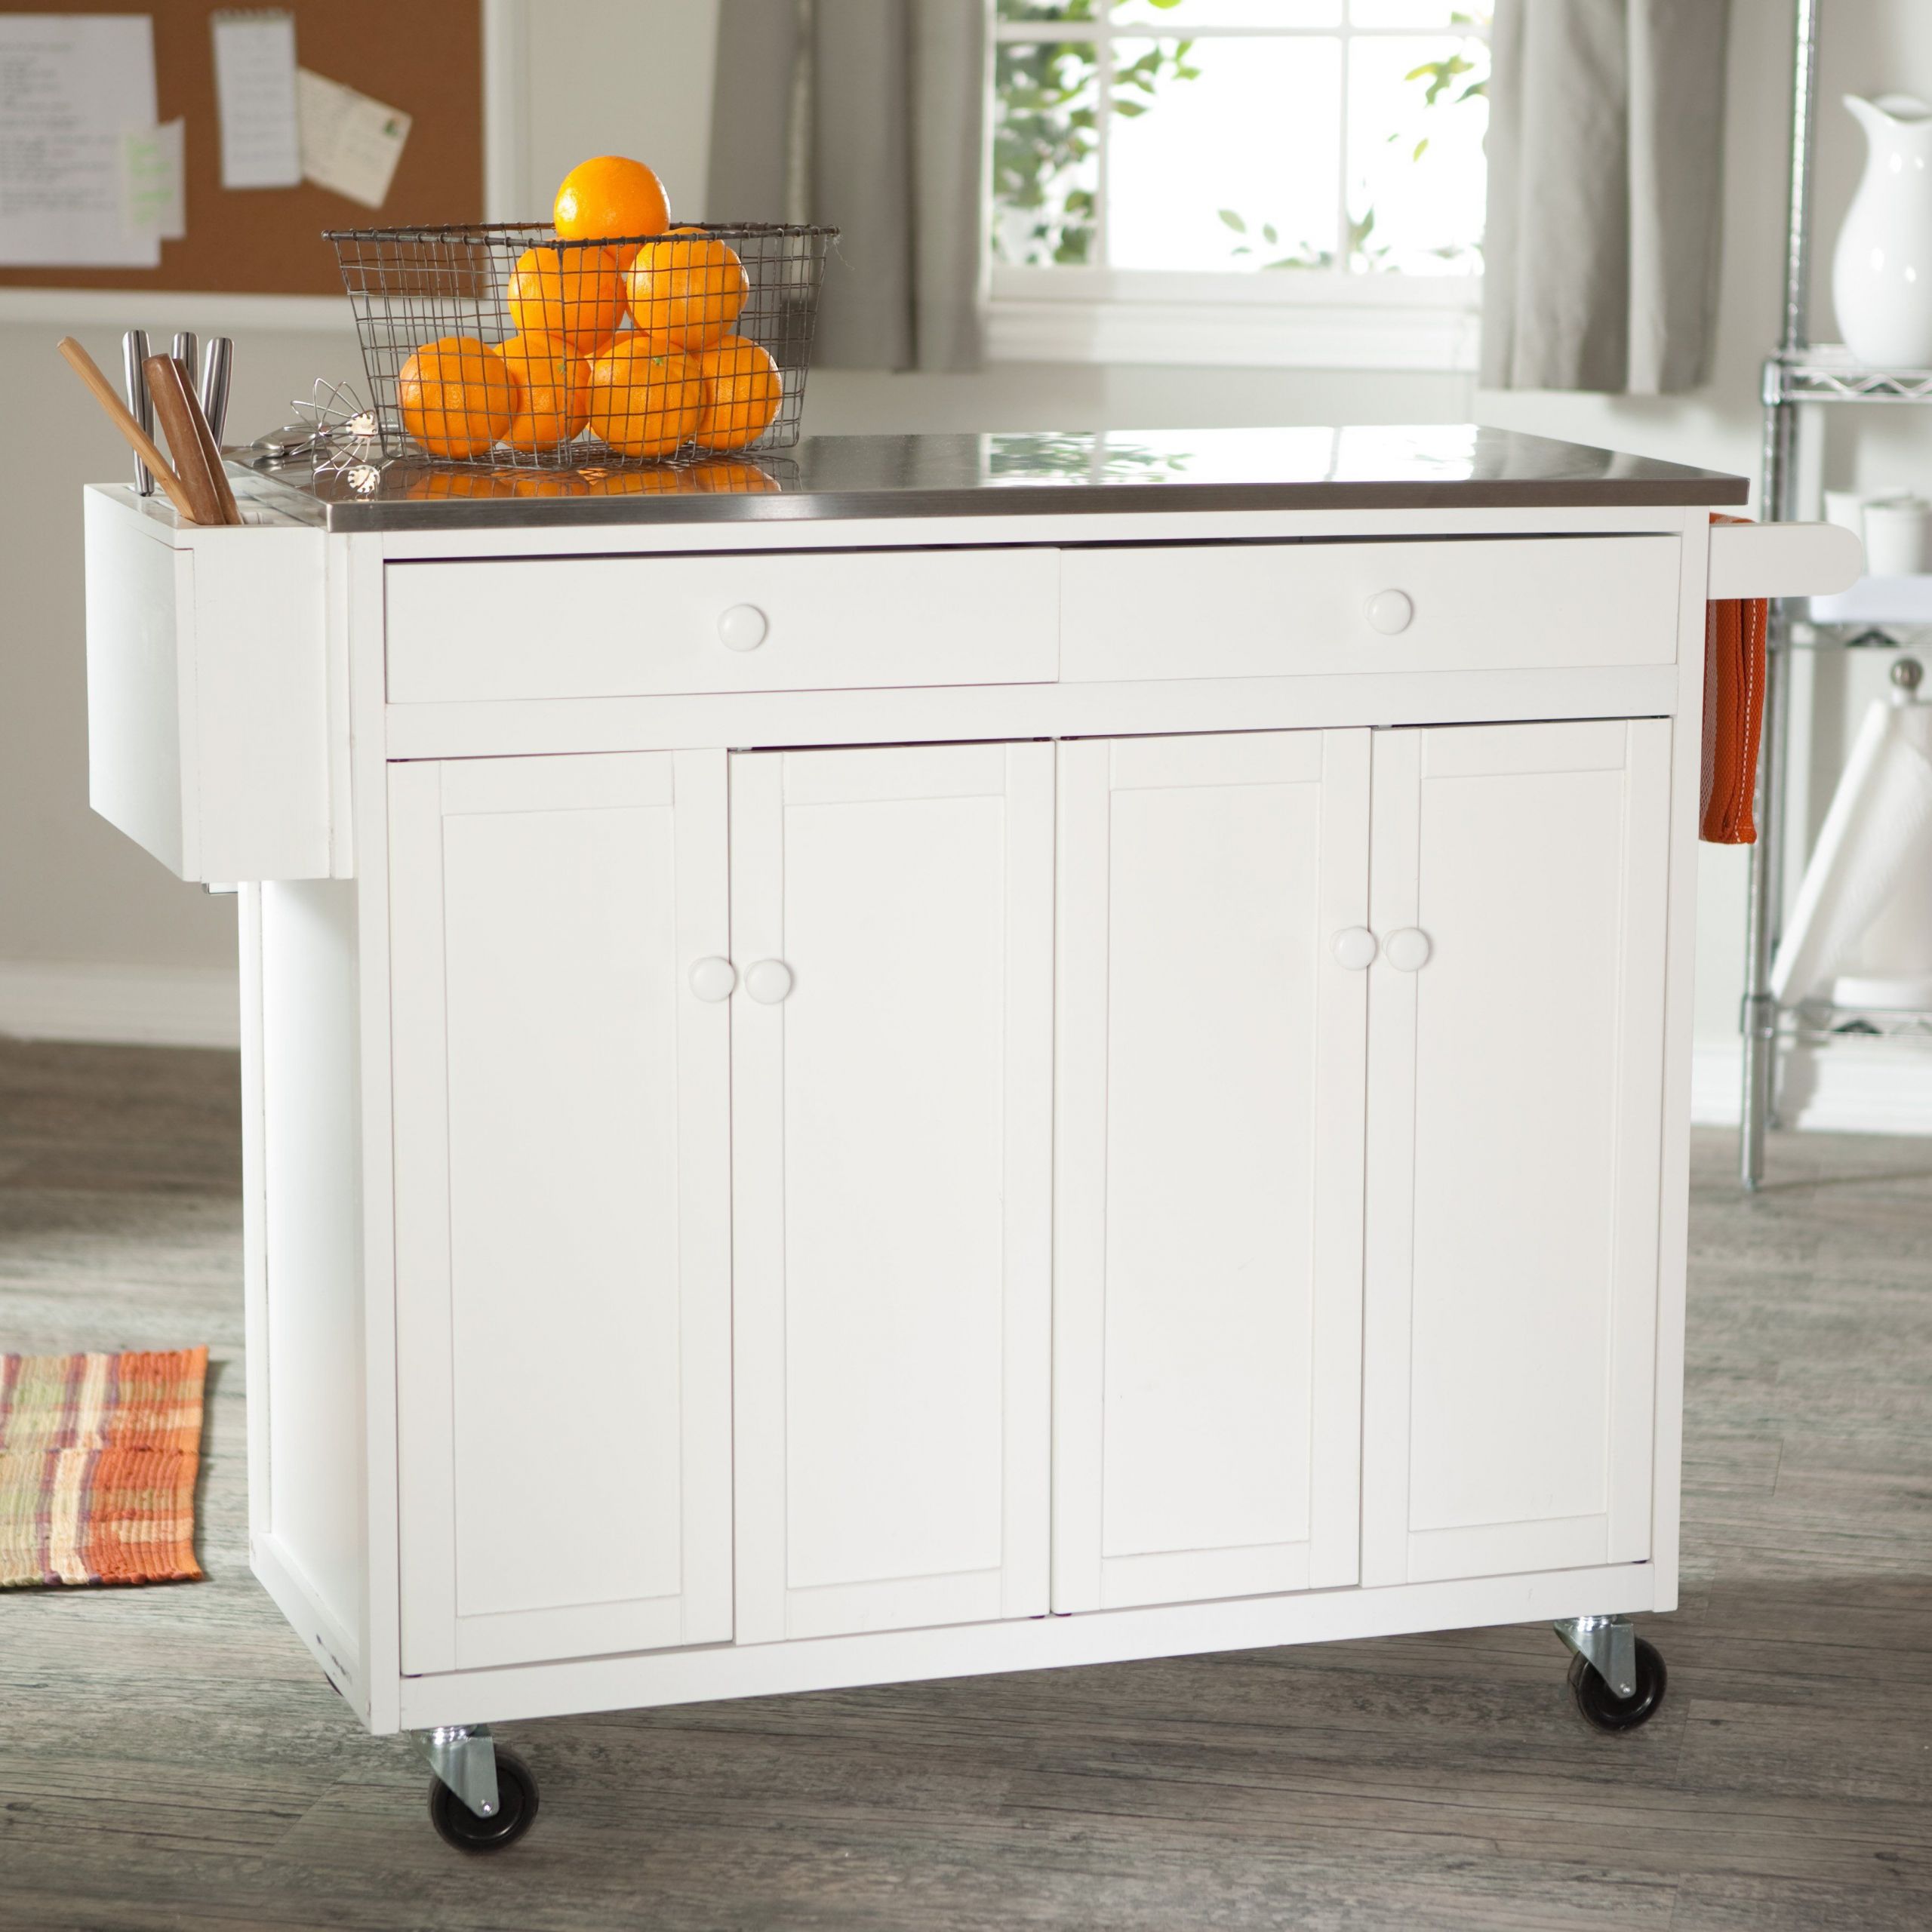 Small Mobile Kitchen Island
 The Randall Portable Kitchen Island with Optional Stools